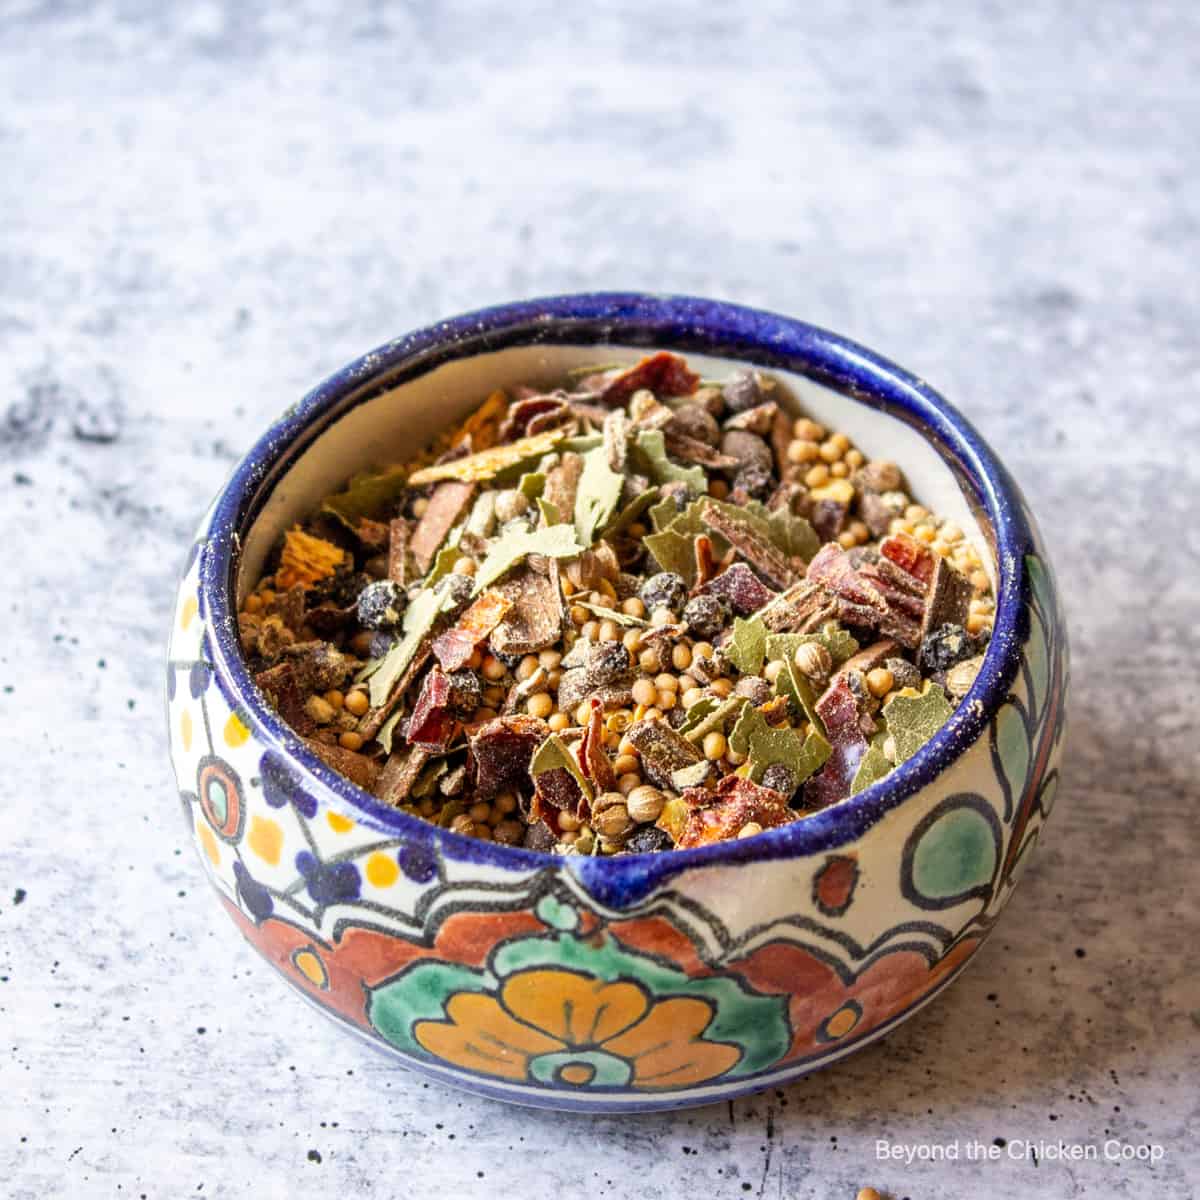 A colorful dish filled with pickling spice.